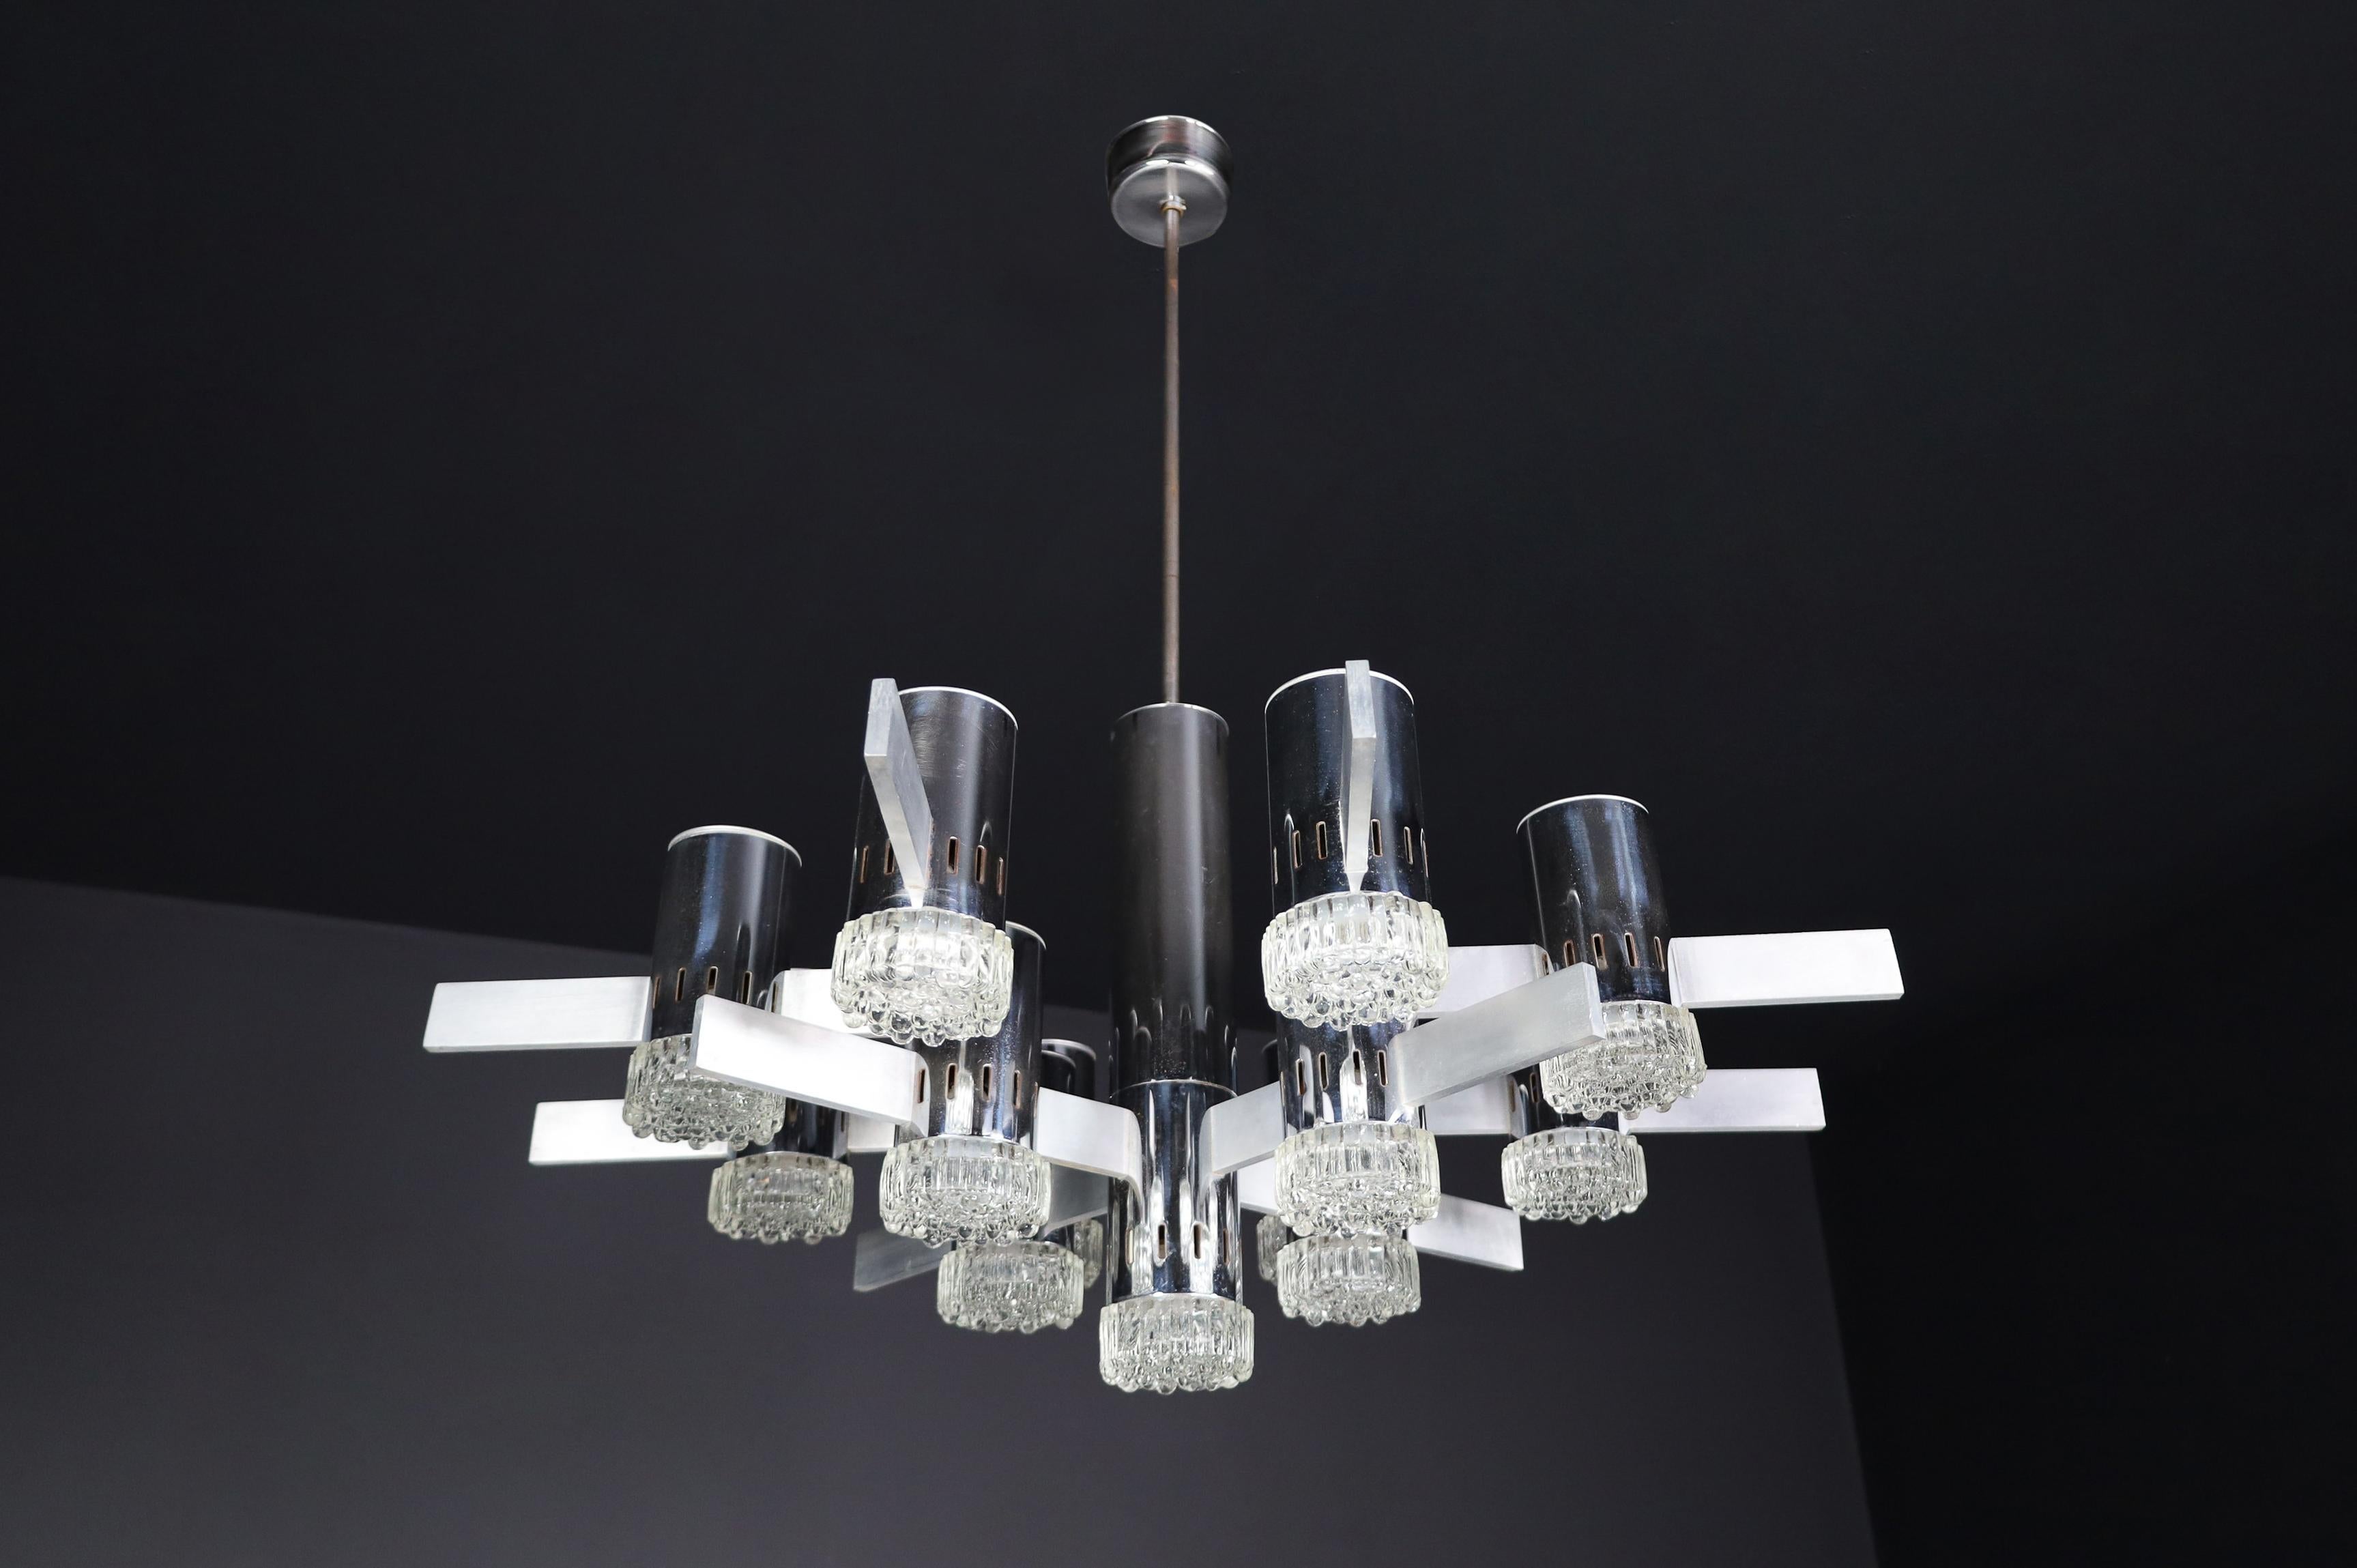  Gaetano Sciolari XXl Chandelier with chrome and aluminium fixture, Italy, circa 1970s

This is an impressive chandelier designed by Angelo Gaetano Sciolari in Italy during the 1970s. This large chandelier features 11 lights, combining chrome and